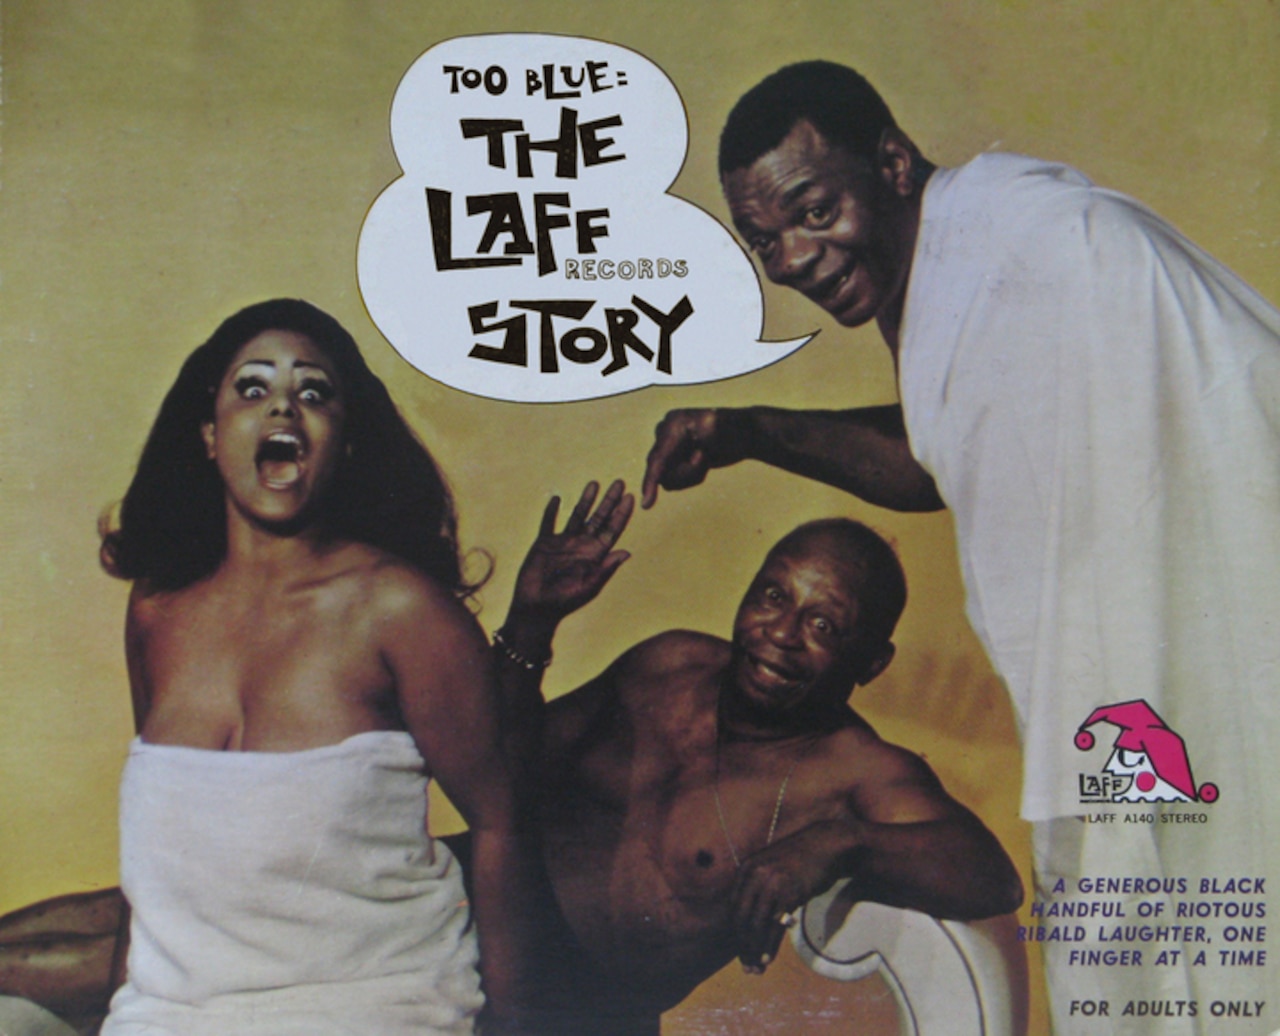 School Teacher Orgy - Too Blue: The Laff Records Story | Red Bull Music Academy Daily